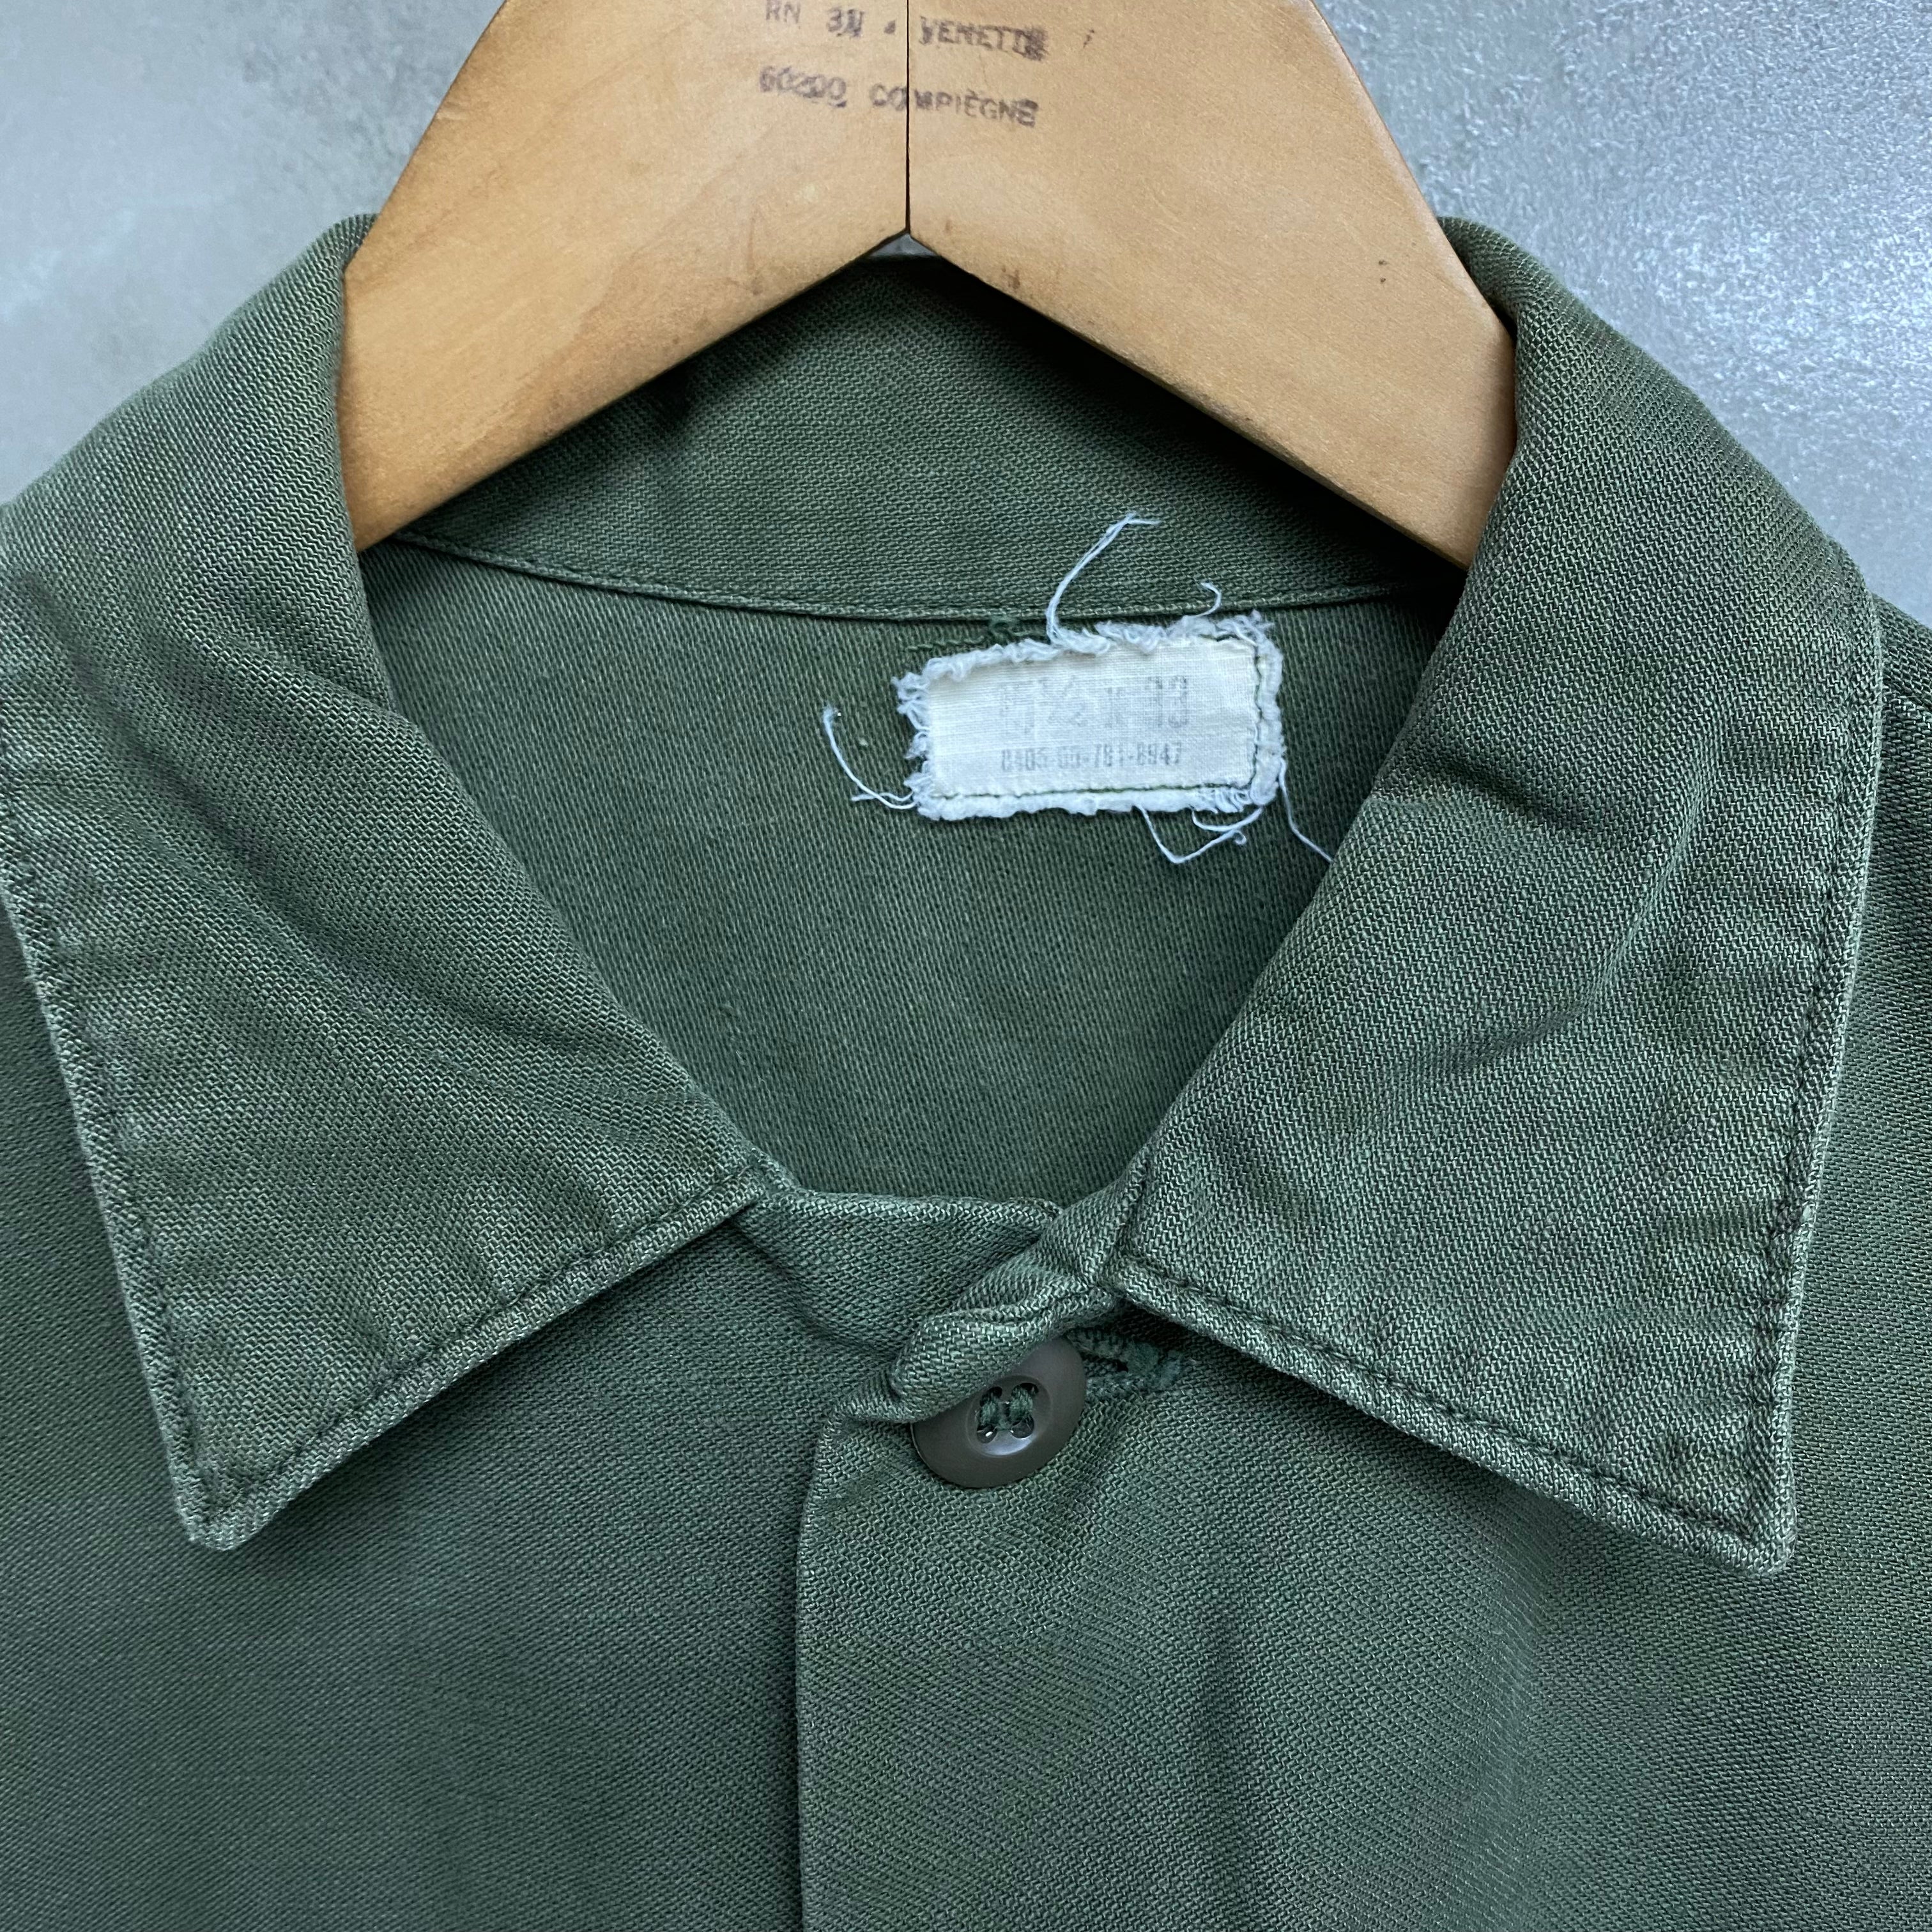 [ ONLY ONE ! ] US ARMED FORCES UTILITY SHORT SLEEVE SHIRT / Mr.Clean Select